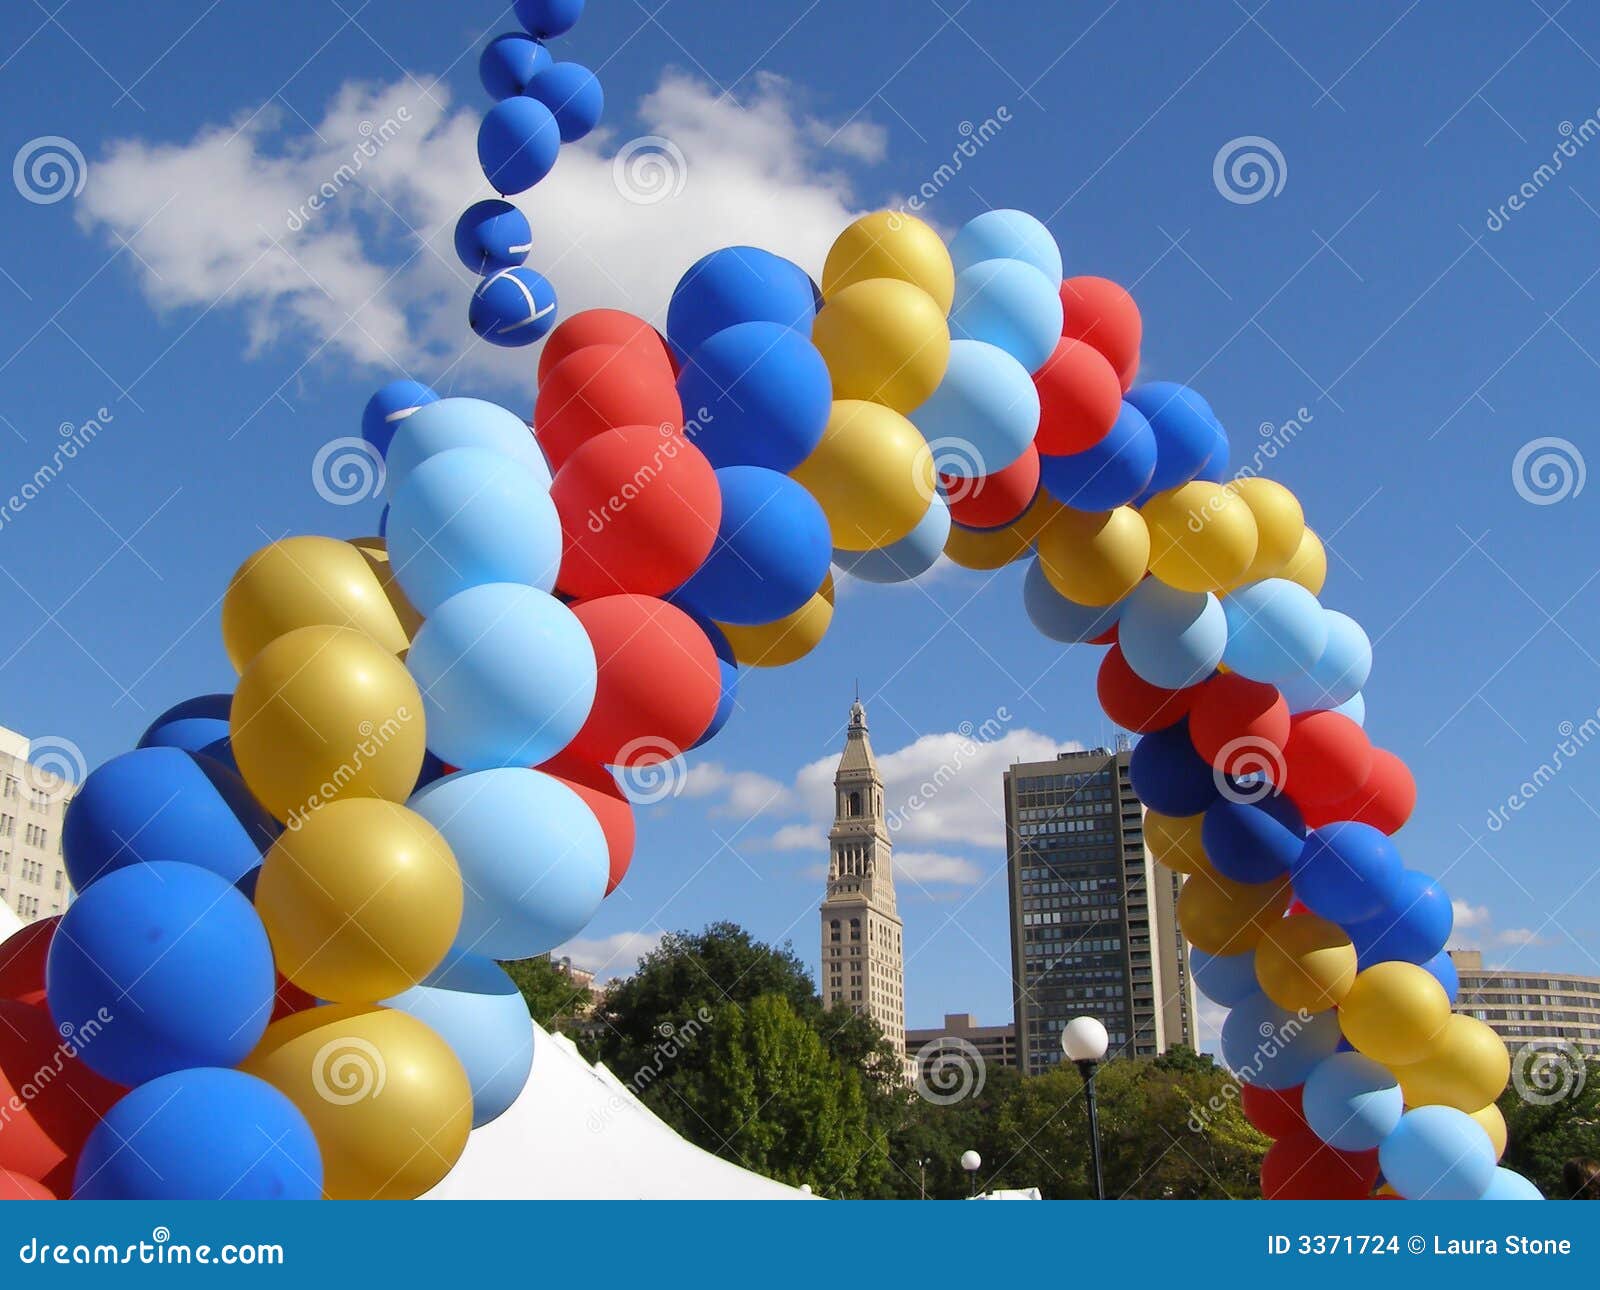 47 HQ Pictures Balloon Decoration Photo Gallery / Stage Front Balloon Decorations That Balloons